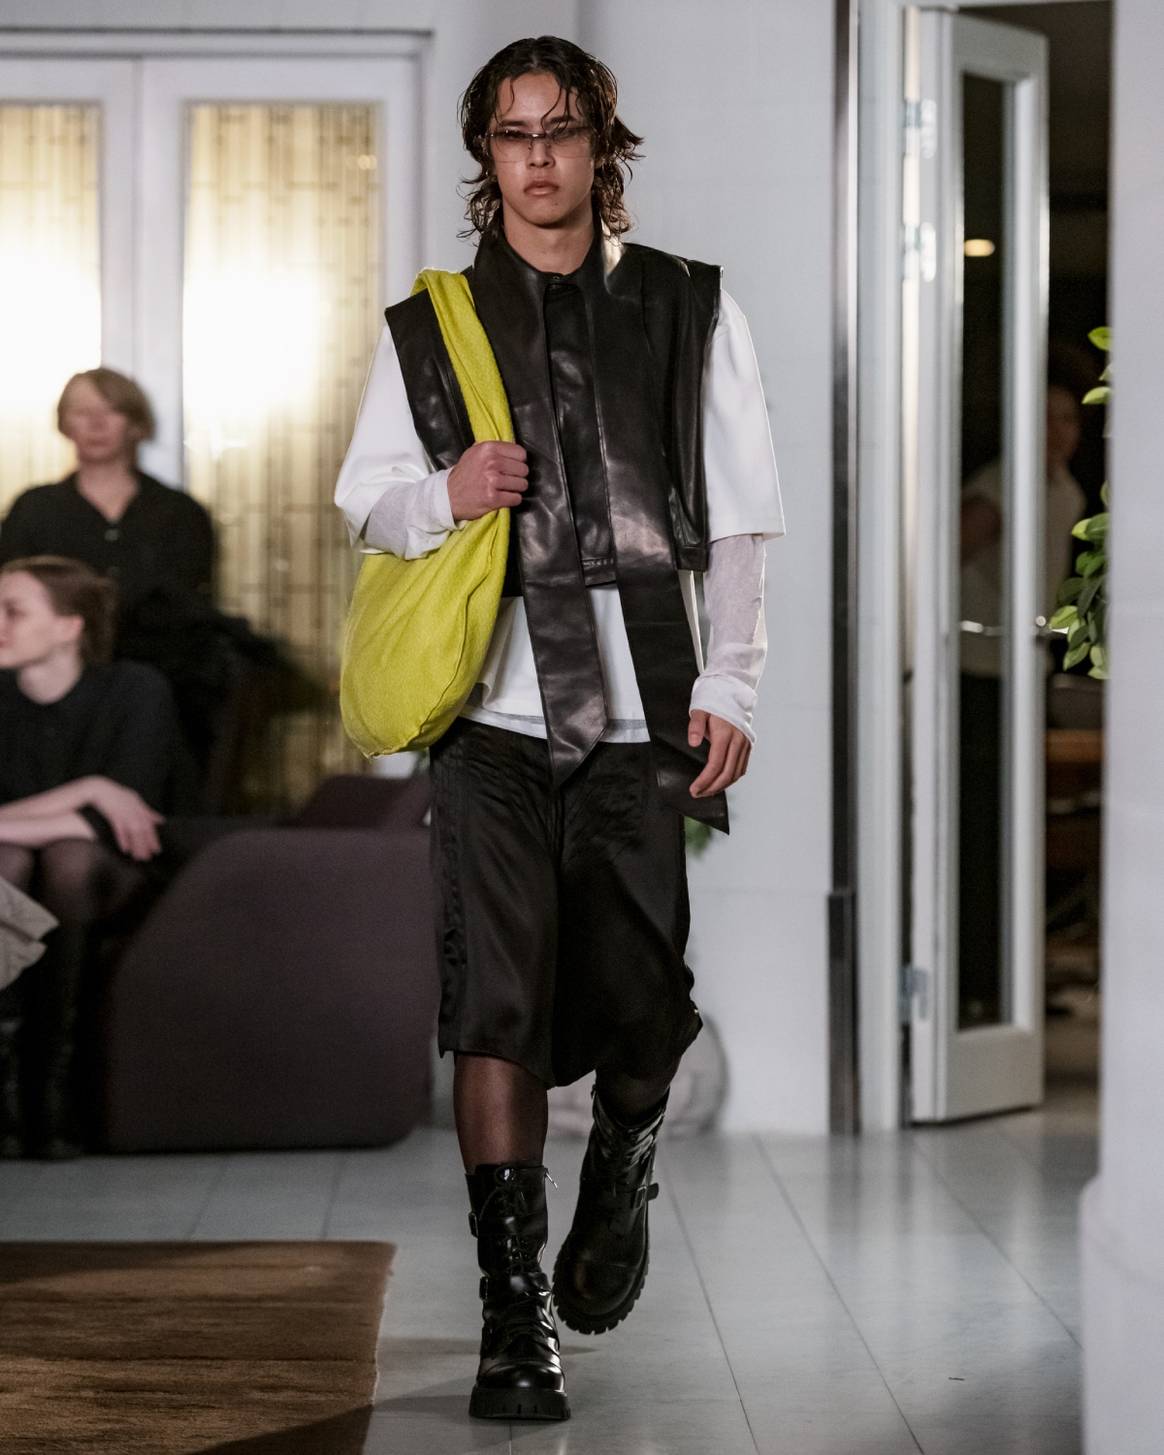 In Pictures: Beckmans College of Design at Stockholm Fashion Week